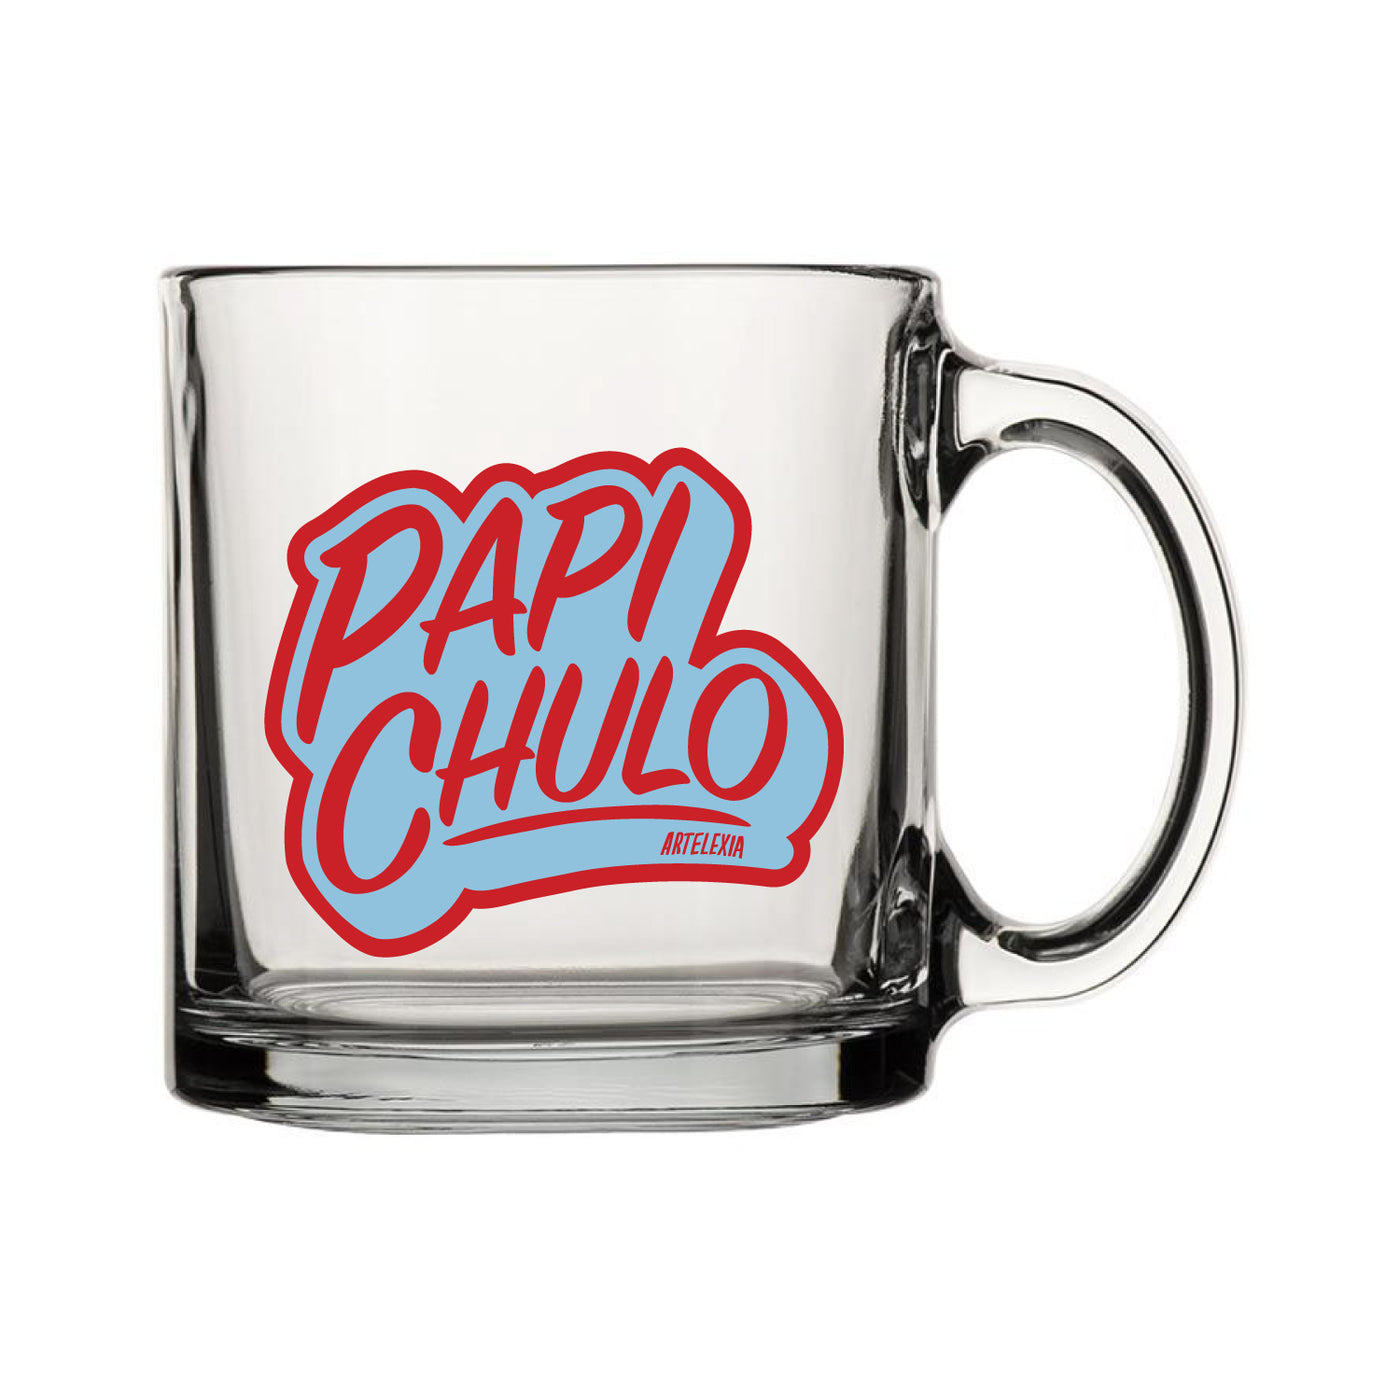 Clear glass mug with the phrase Papi Chulo in red lettering outlined in light blue.